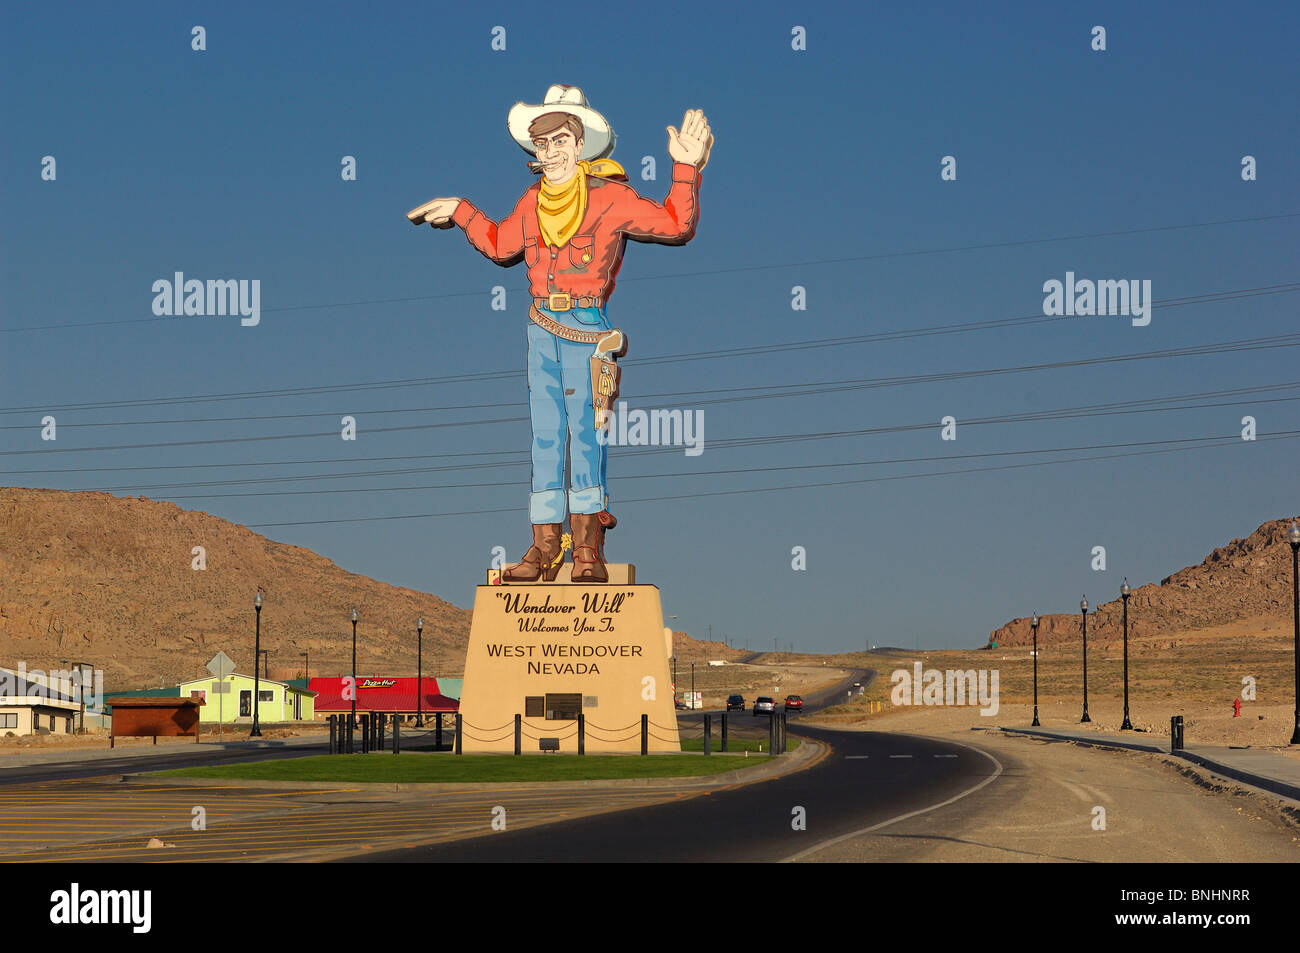 Artistic View Of Wendover Will Cowboy Sign In Nevada 